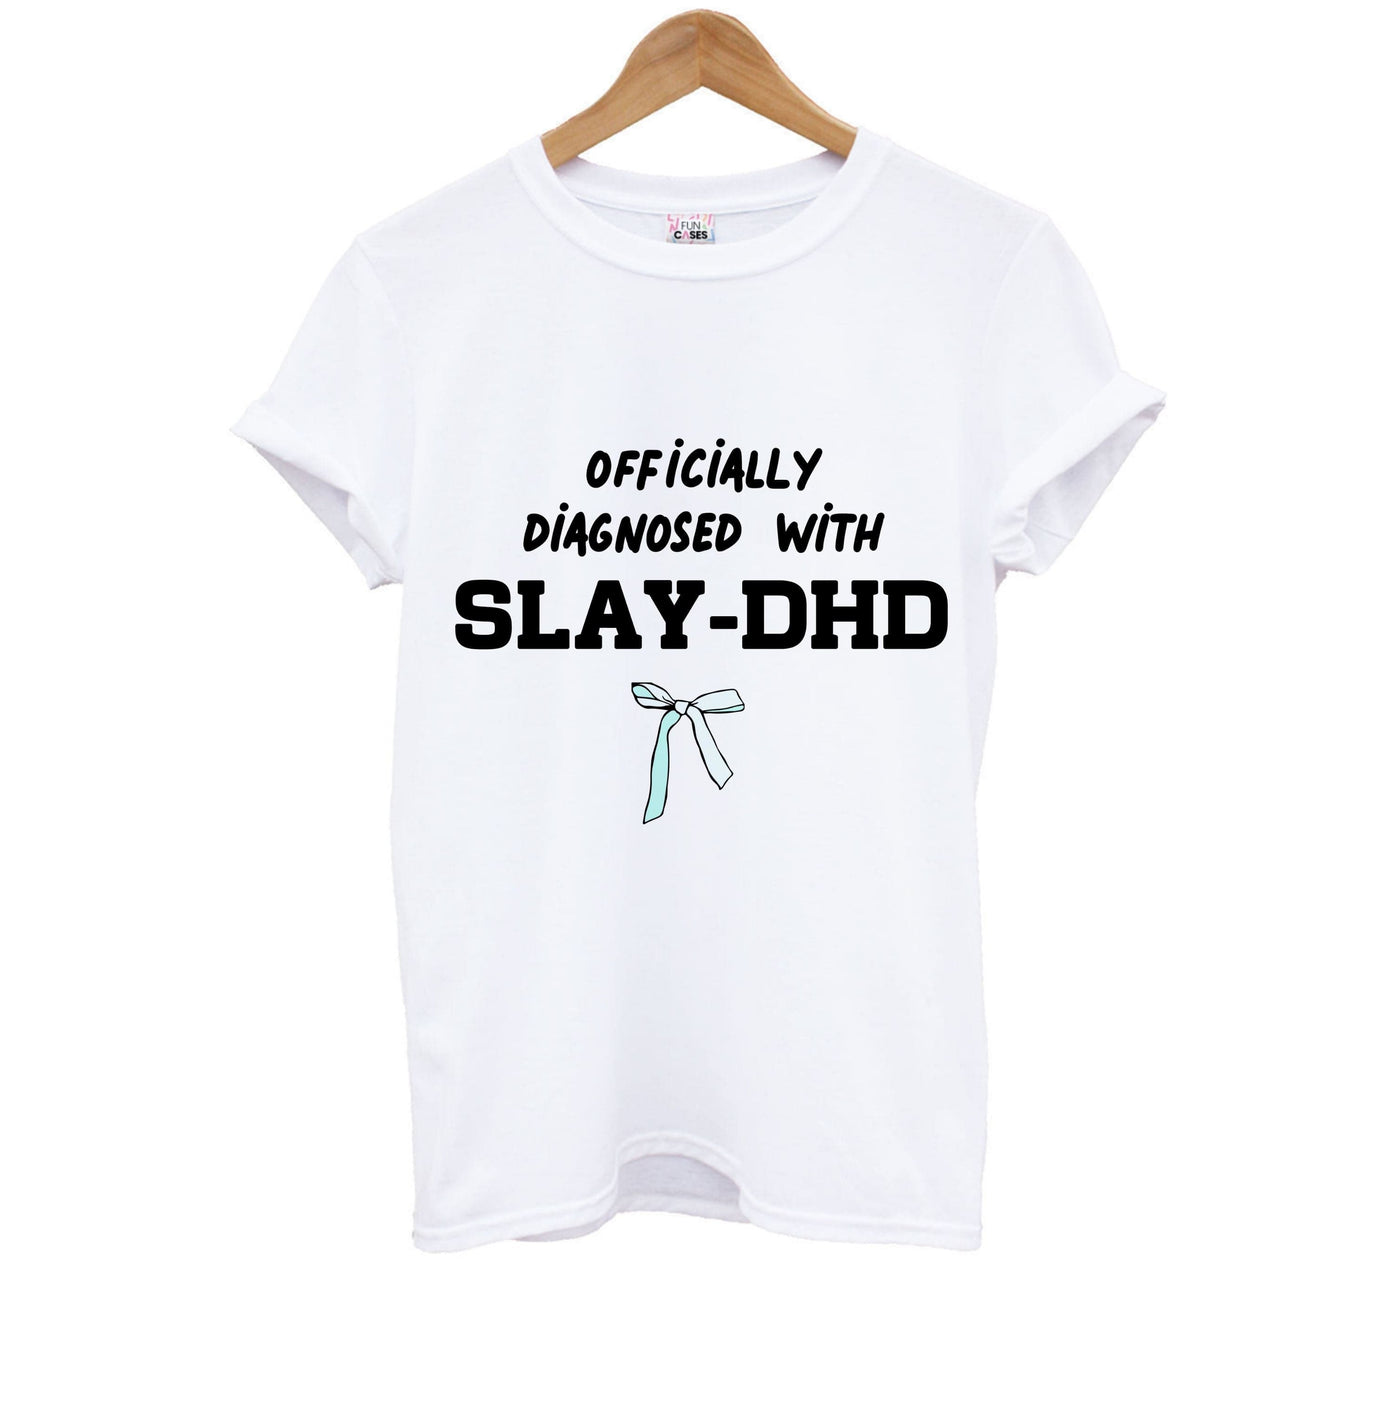 Officially Diagnosed With Slay-DHD - TikTok Trends Kids T-Shirt